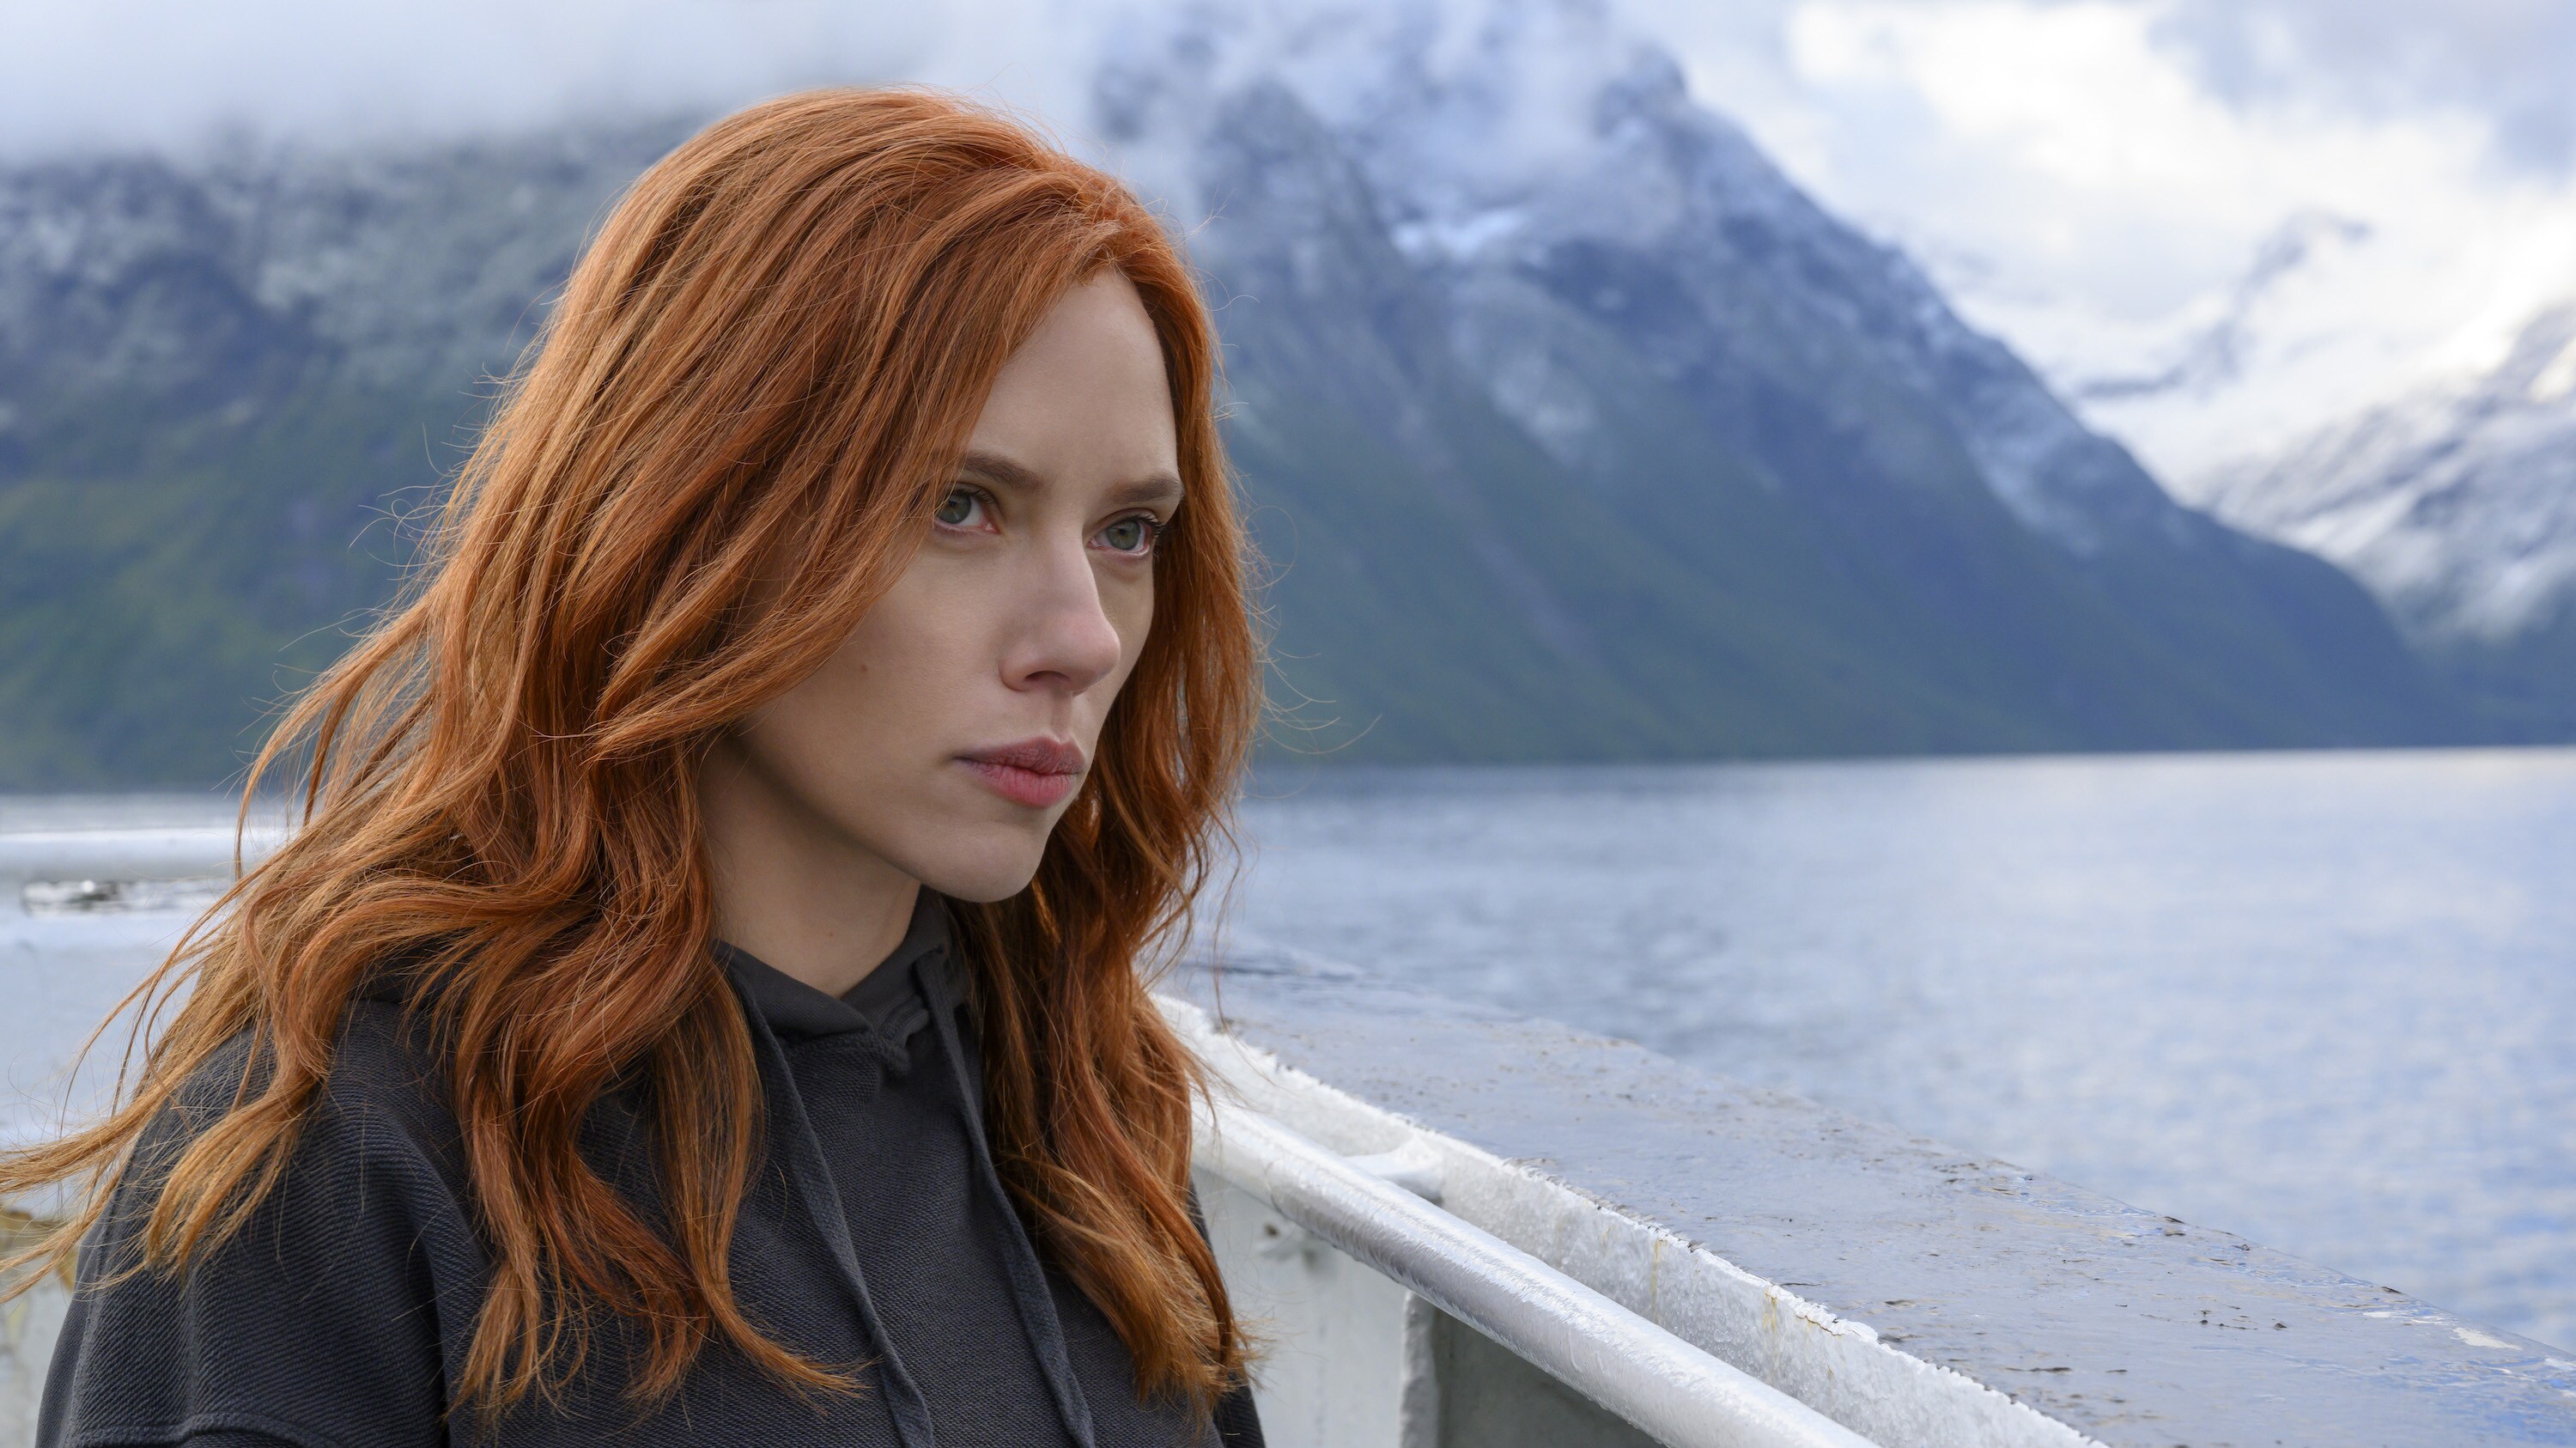 Black Widow/Natasha Romanoff (Scarlett Johansson) in Marvel Studios' BLACK WIDOW, in theaters and on Disney+ with Premier Access. Photo by Jay Maidment. ©Marvel Studios 2021. All Rights Reserved.